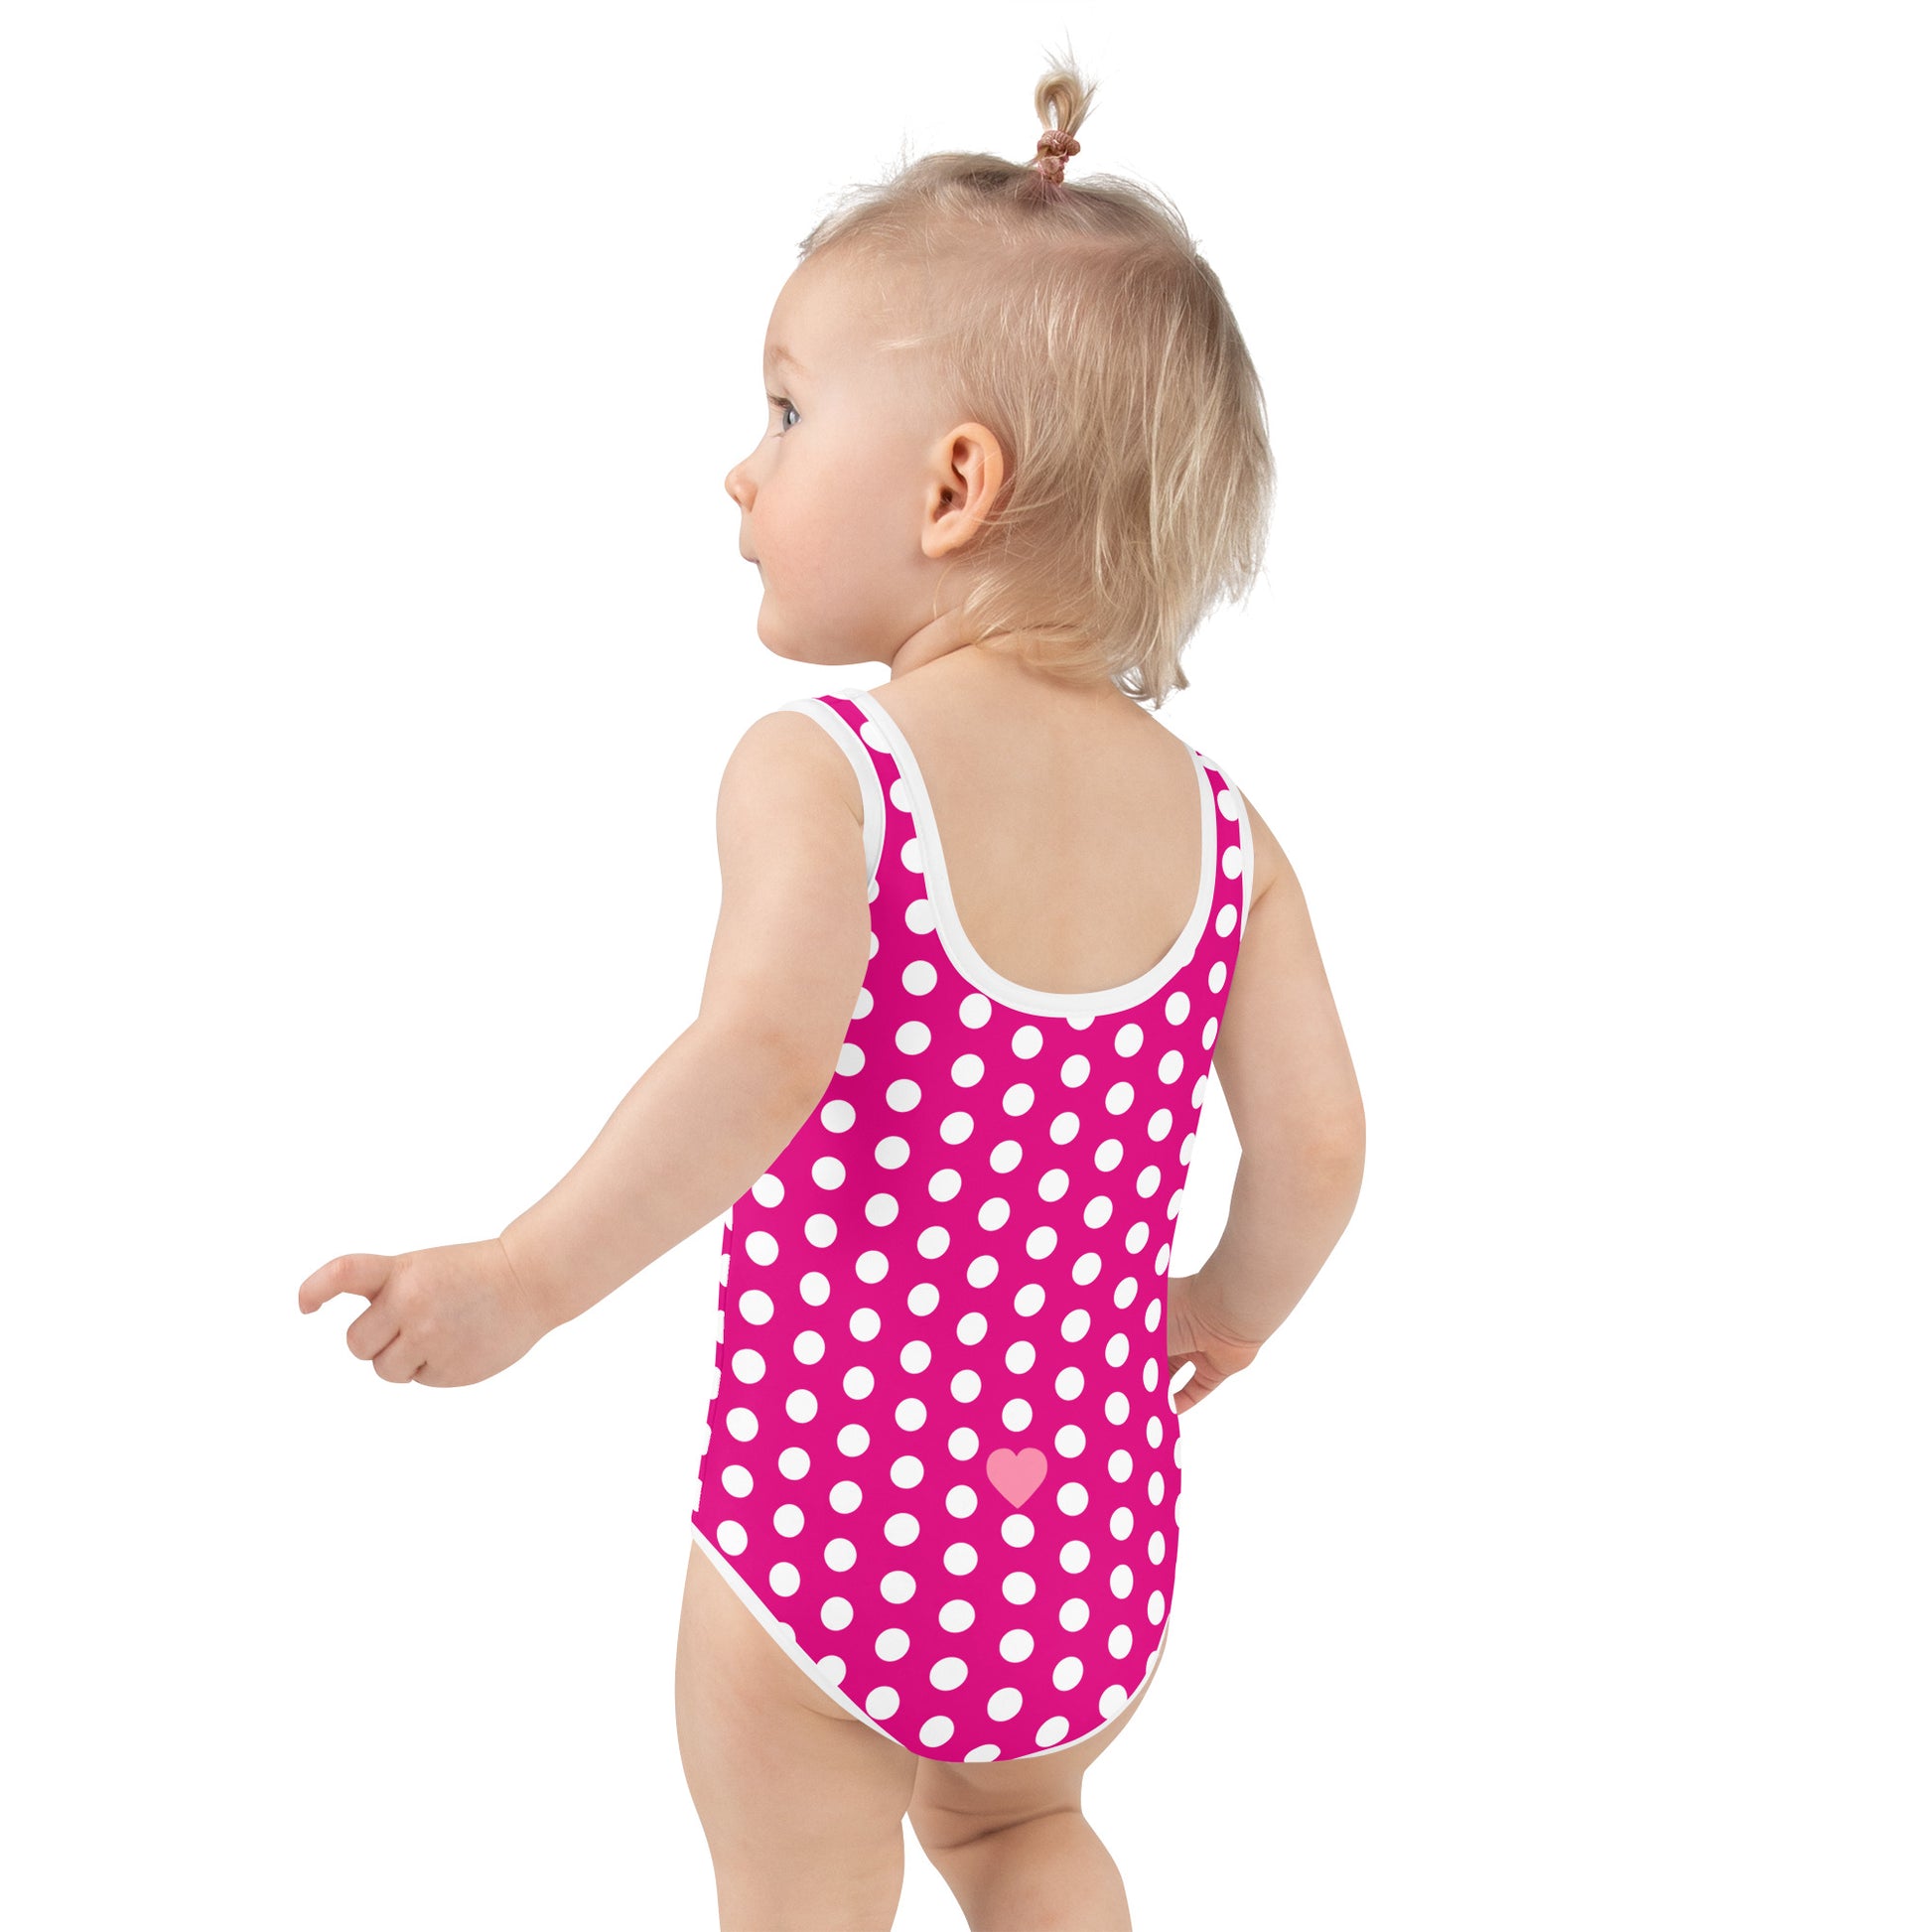 a little girl in a pink and white polka dot swimsuit